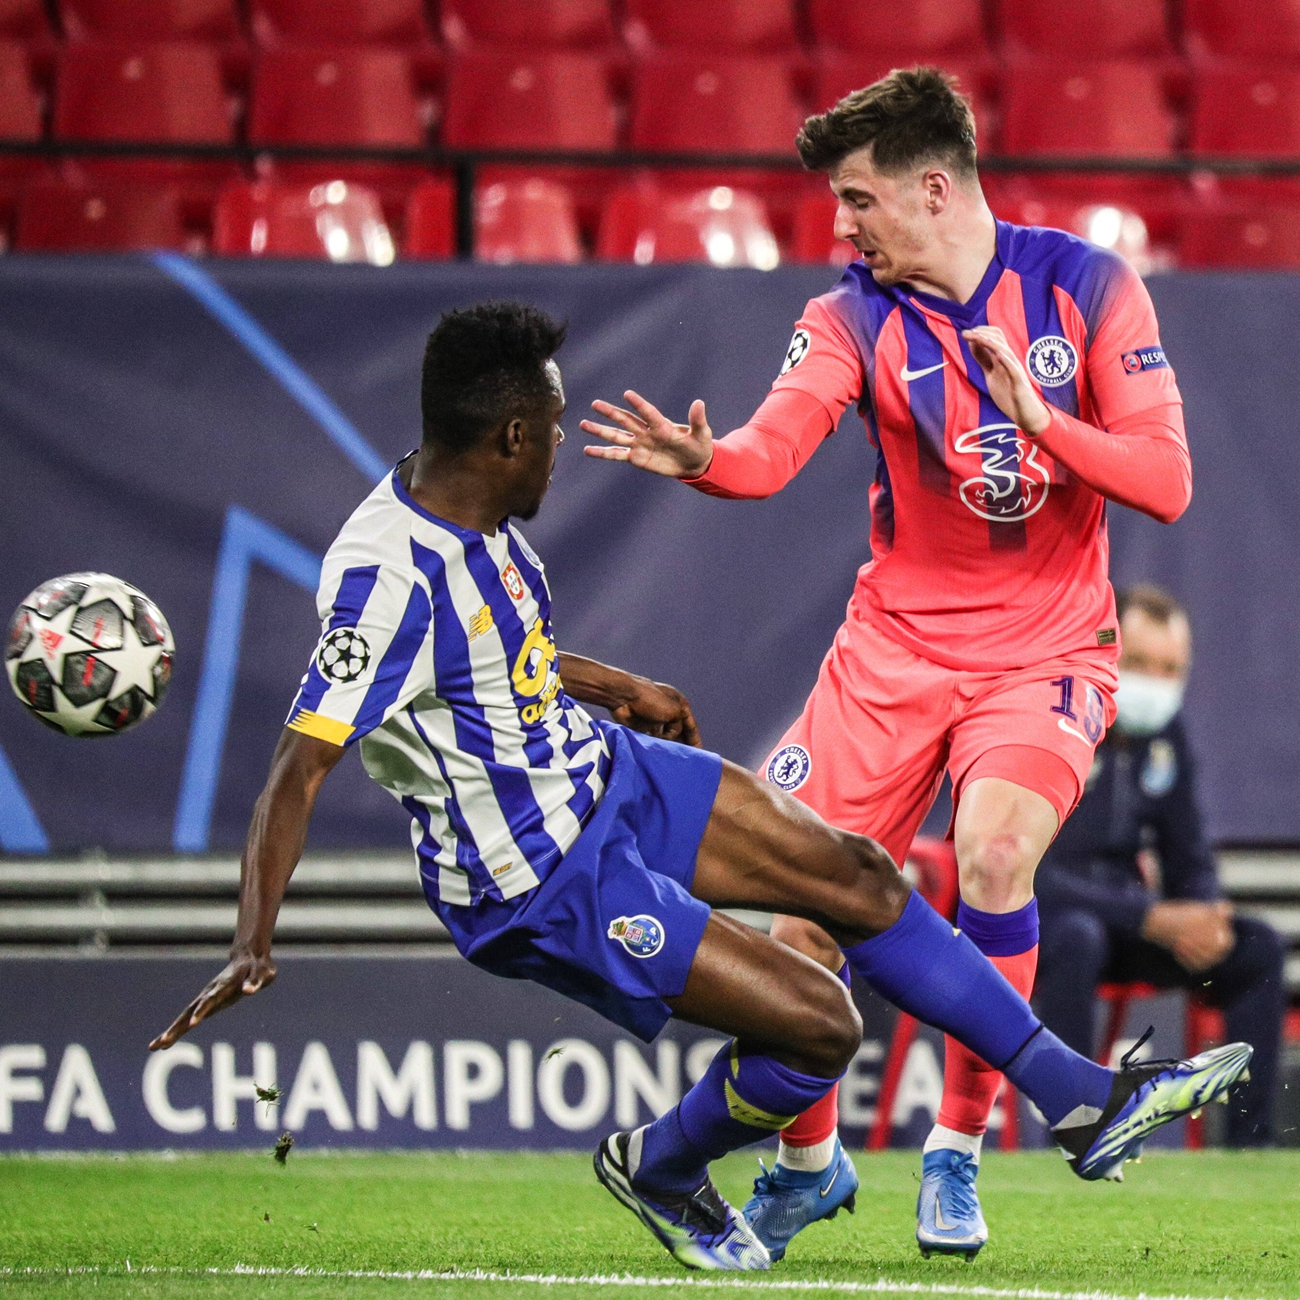 Mason Mount (right) of Chelsea competes for the ball with Zaidu Sanusi of Porto on Wednesday in Seville, Spain. Photo: VCG